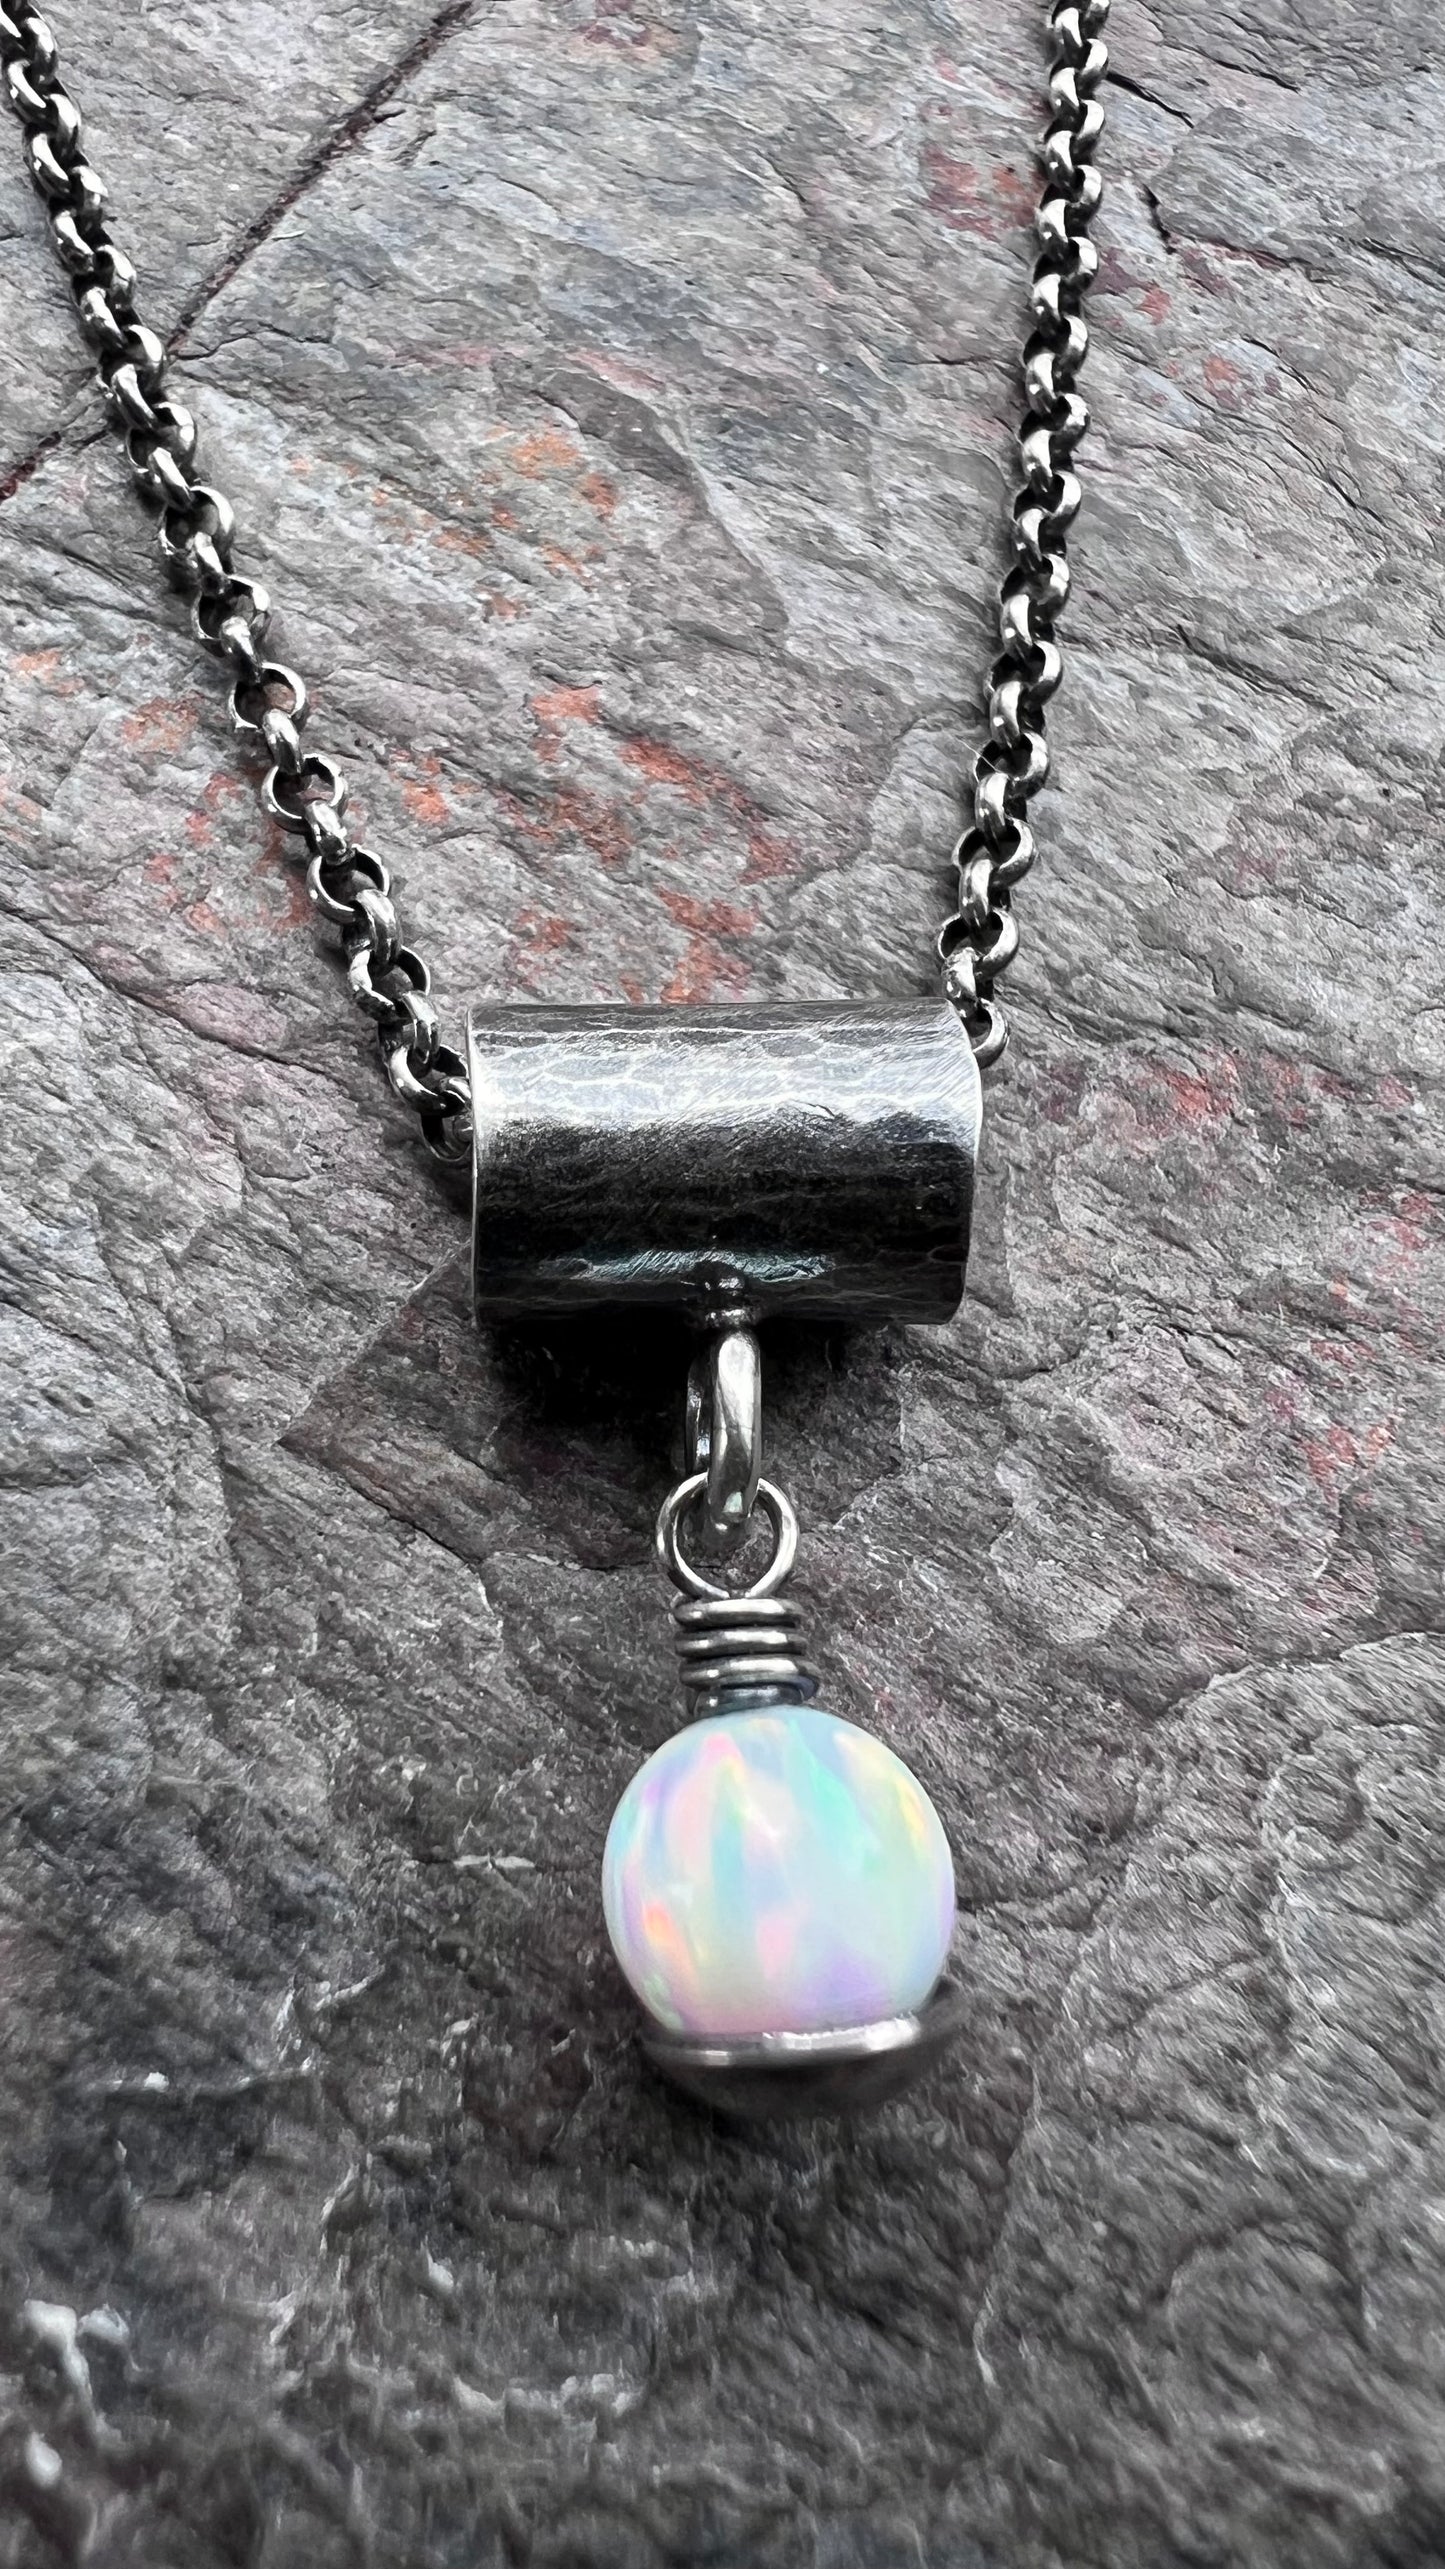 Sterling Silver and Simulated Opal Necklace - Simulated Opal Pendant on Sterling Silver Chain